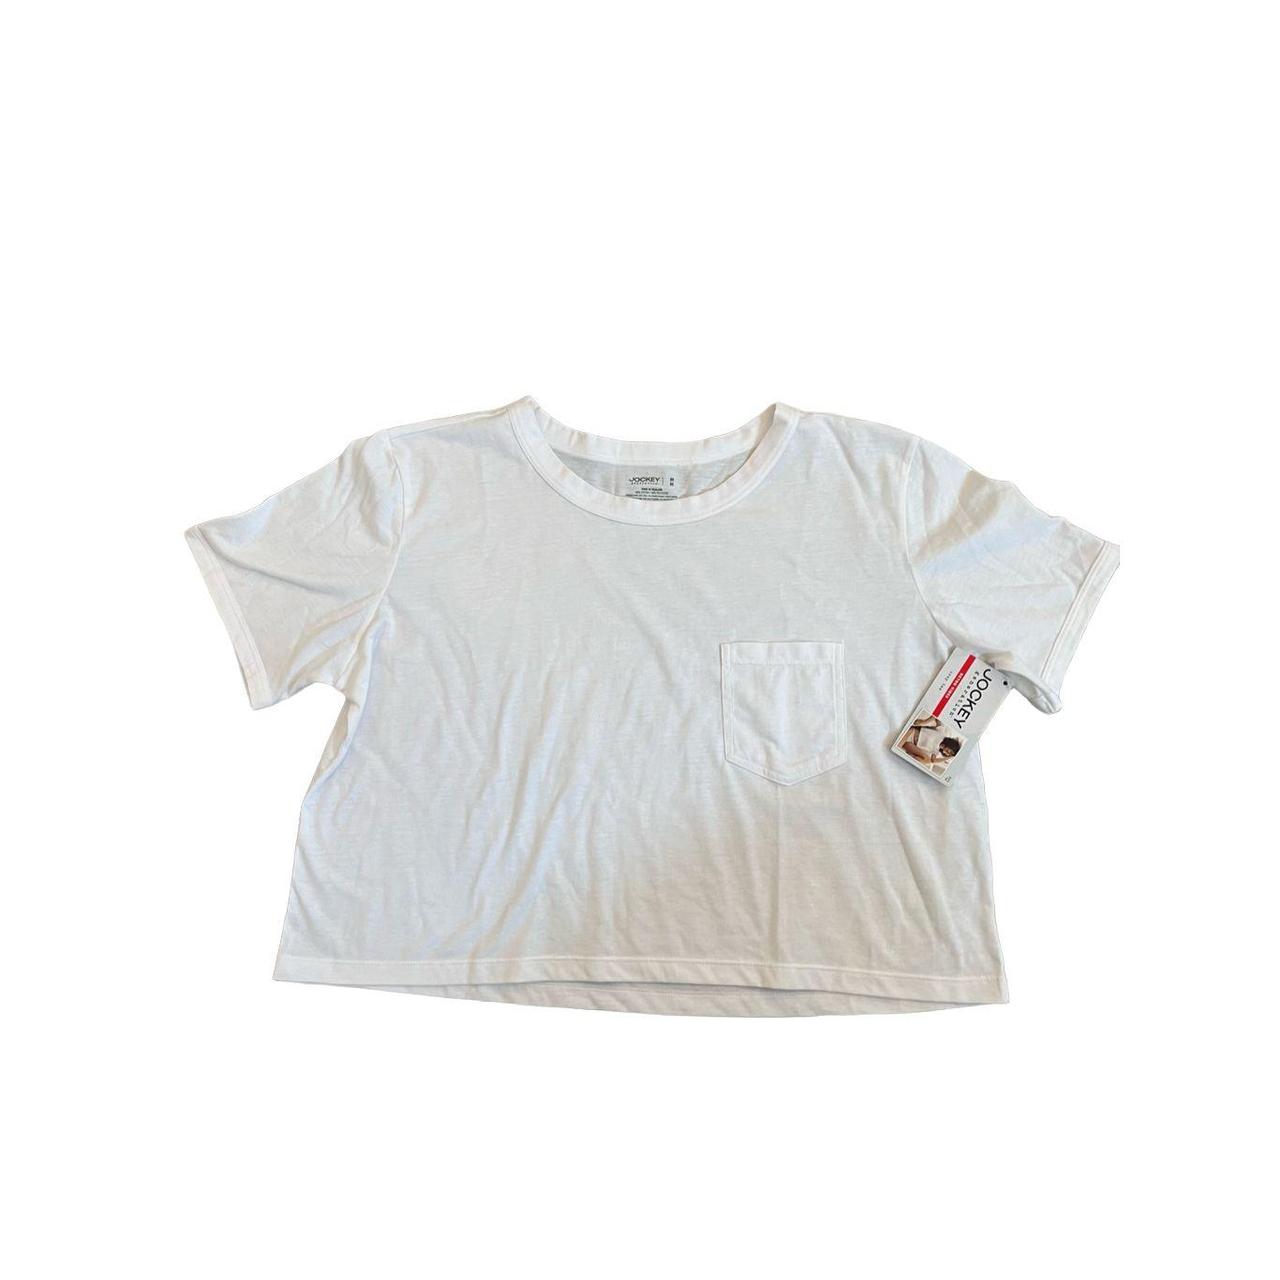 Product Image 1 - Retro vibes crop top
-pocket detail
-60%